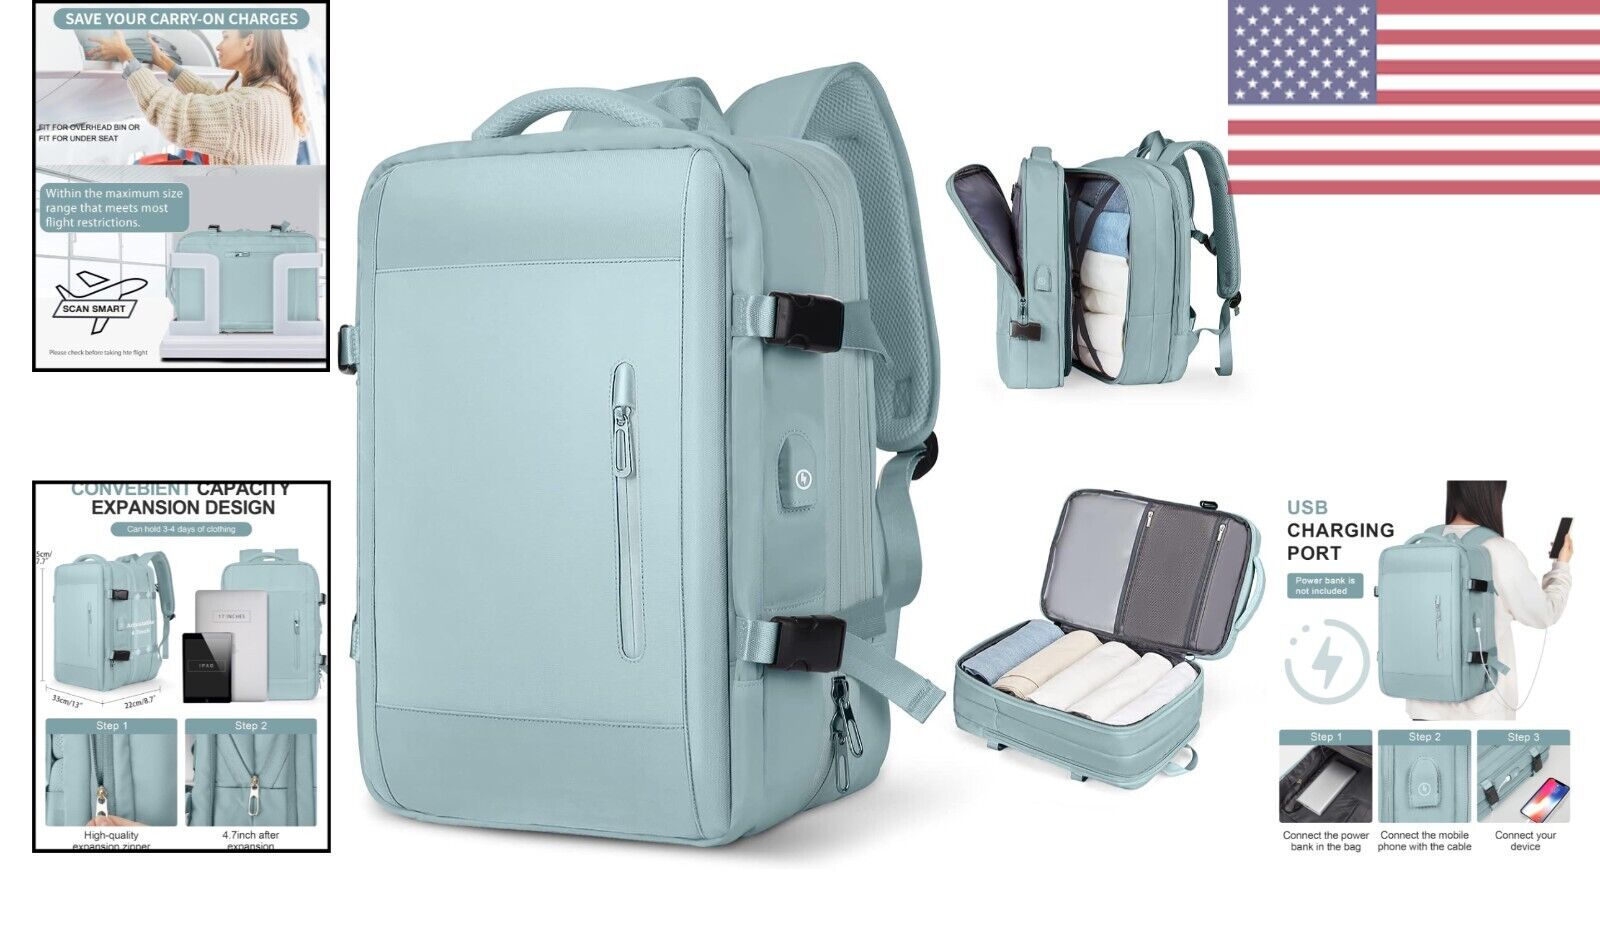 Durable Waterproof Travel Backpack - 40L Capacity, Flight Approved - Light Blue